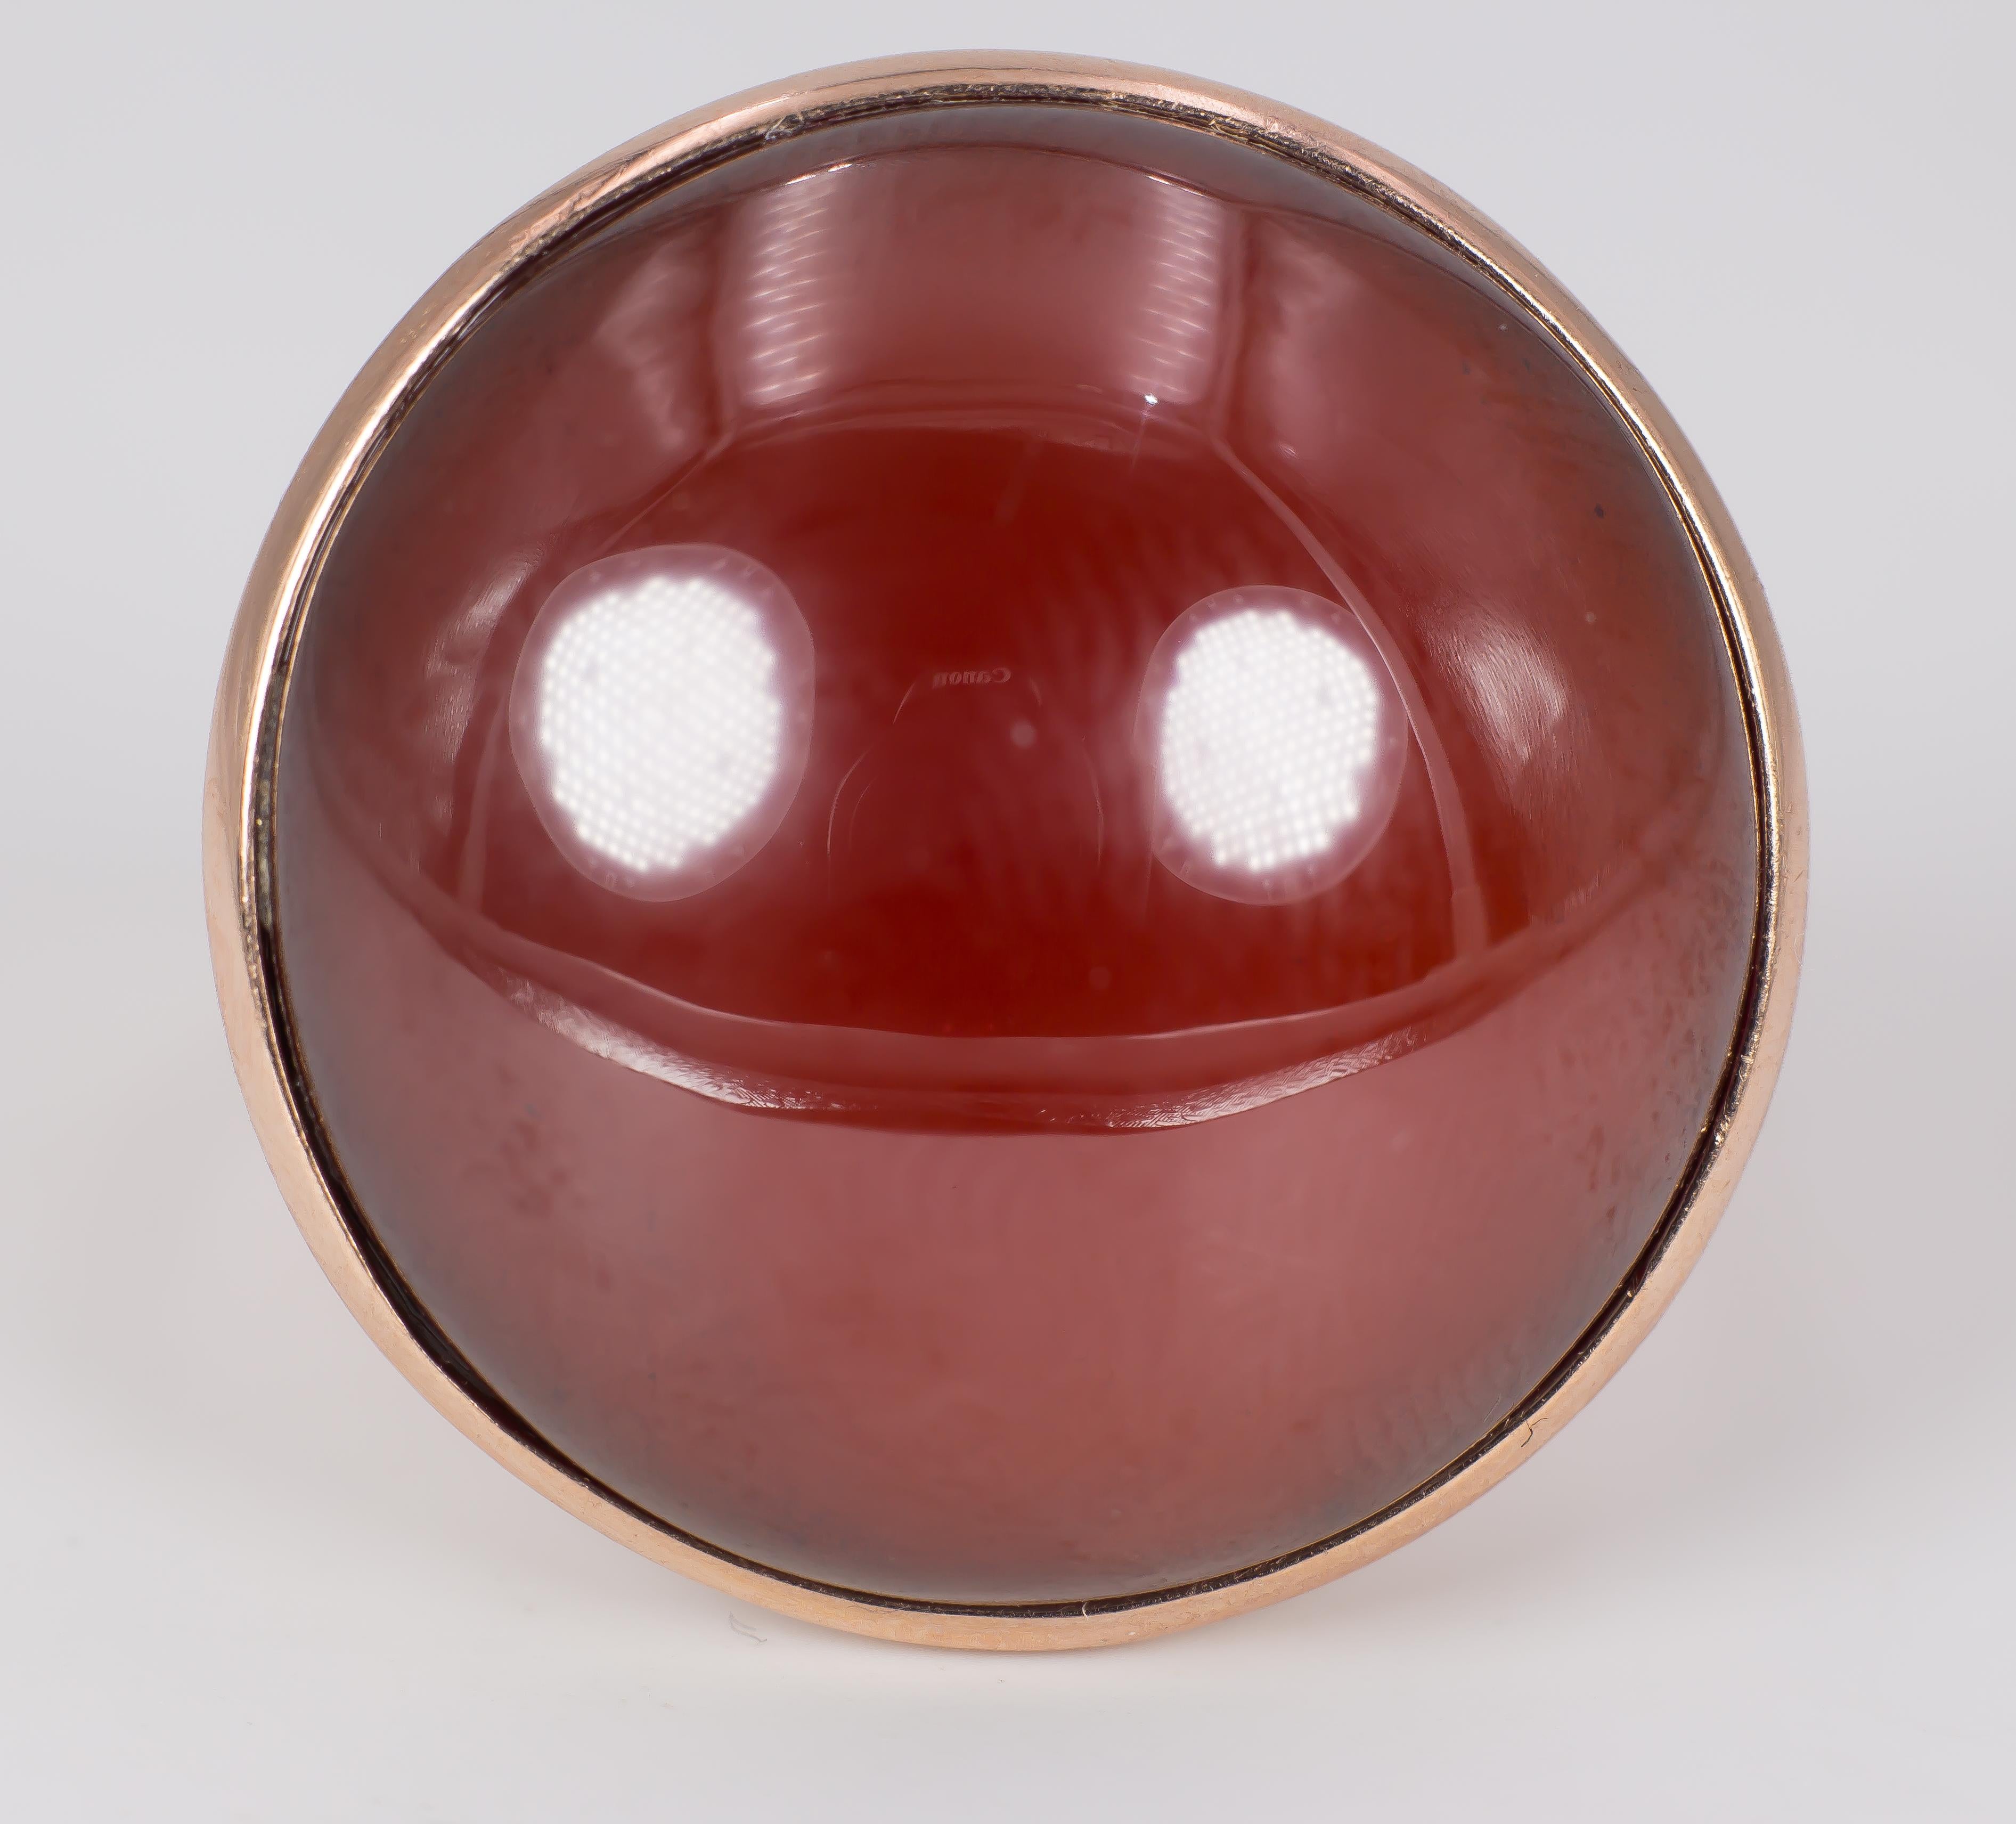 A vintage button ring, decorated with a round carnelian and sets in a 9K mount. The shape of this ring gives a nice and fine look to the hand. The ring dates from the 1960s. 

MATERIALS
9K gold, carnelian

RING SIZE
10 US (resizable)

WEIGHT
17.7 g